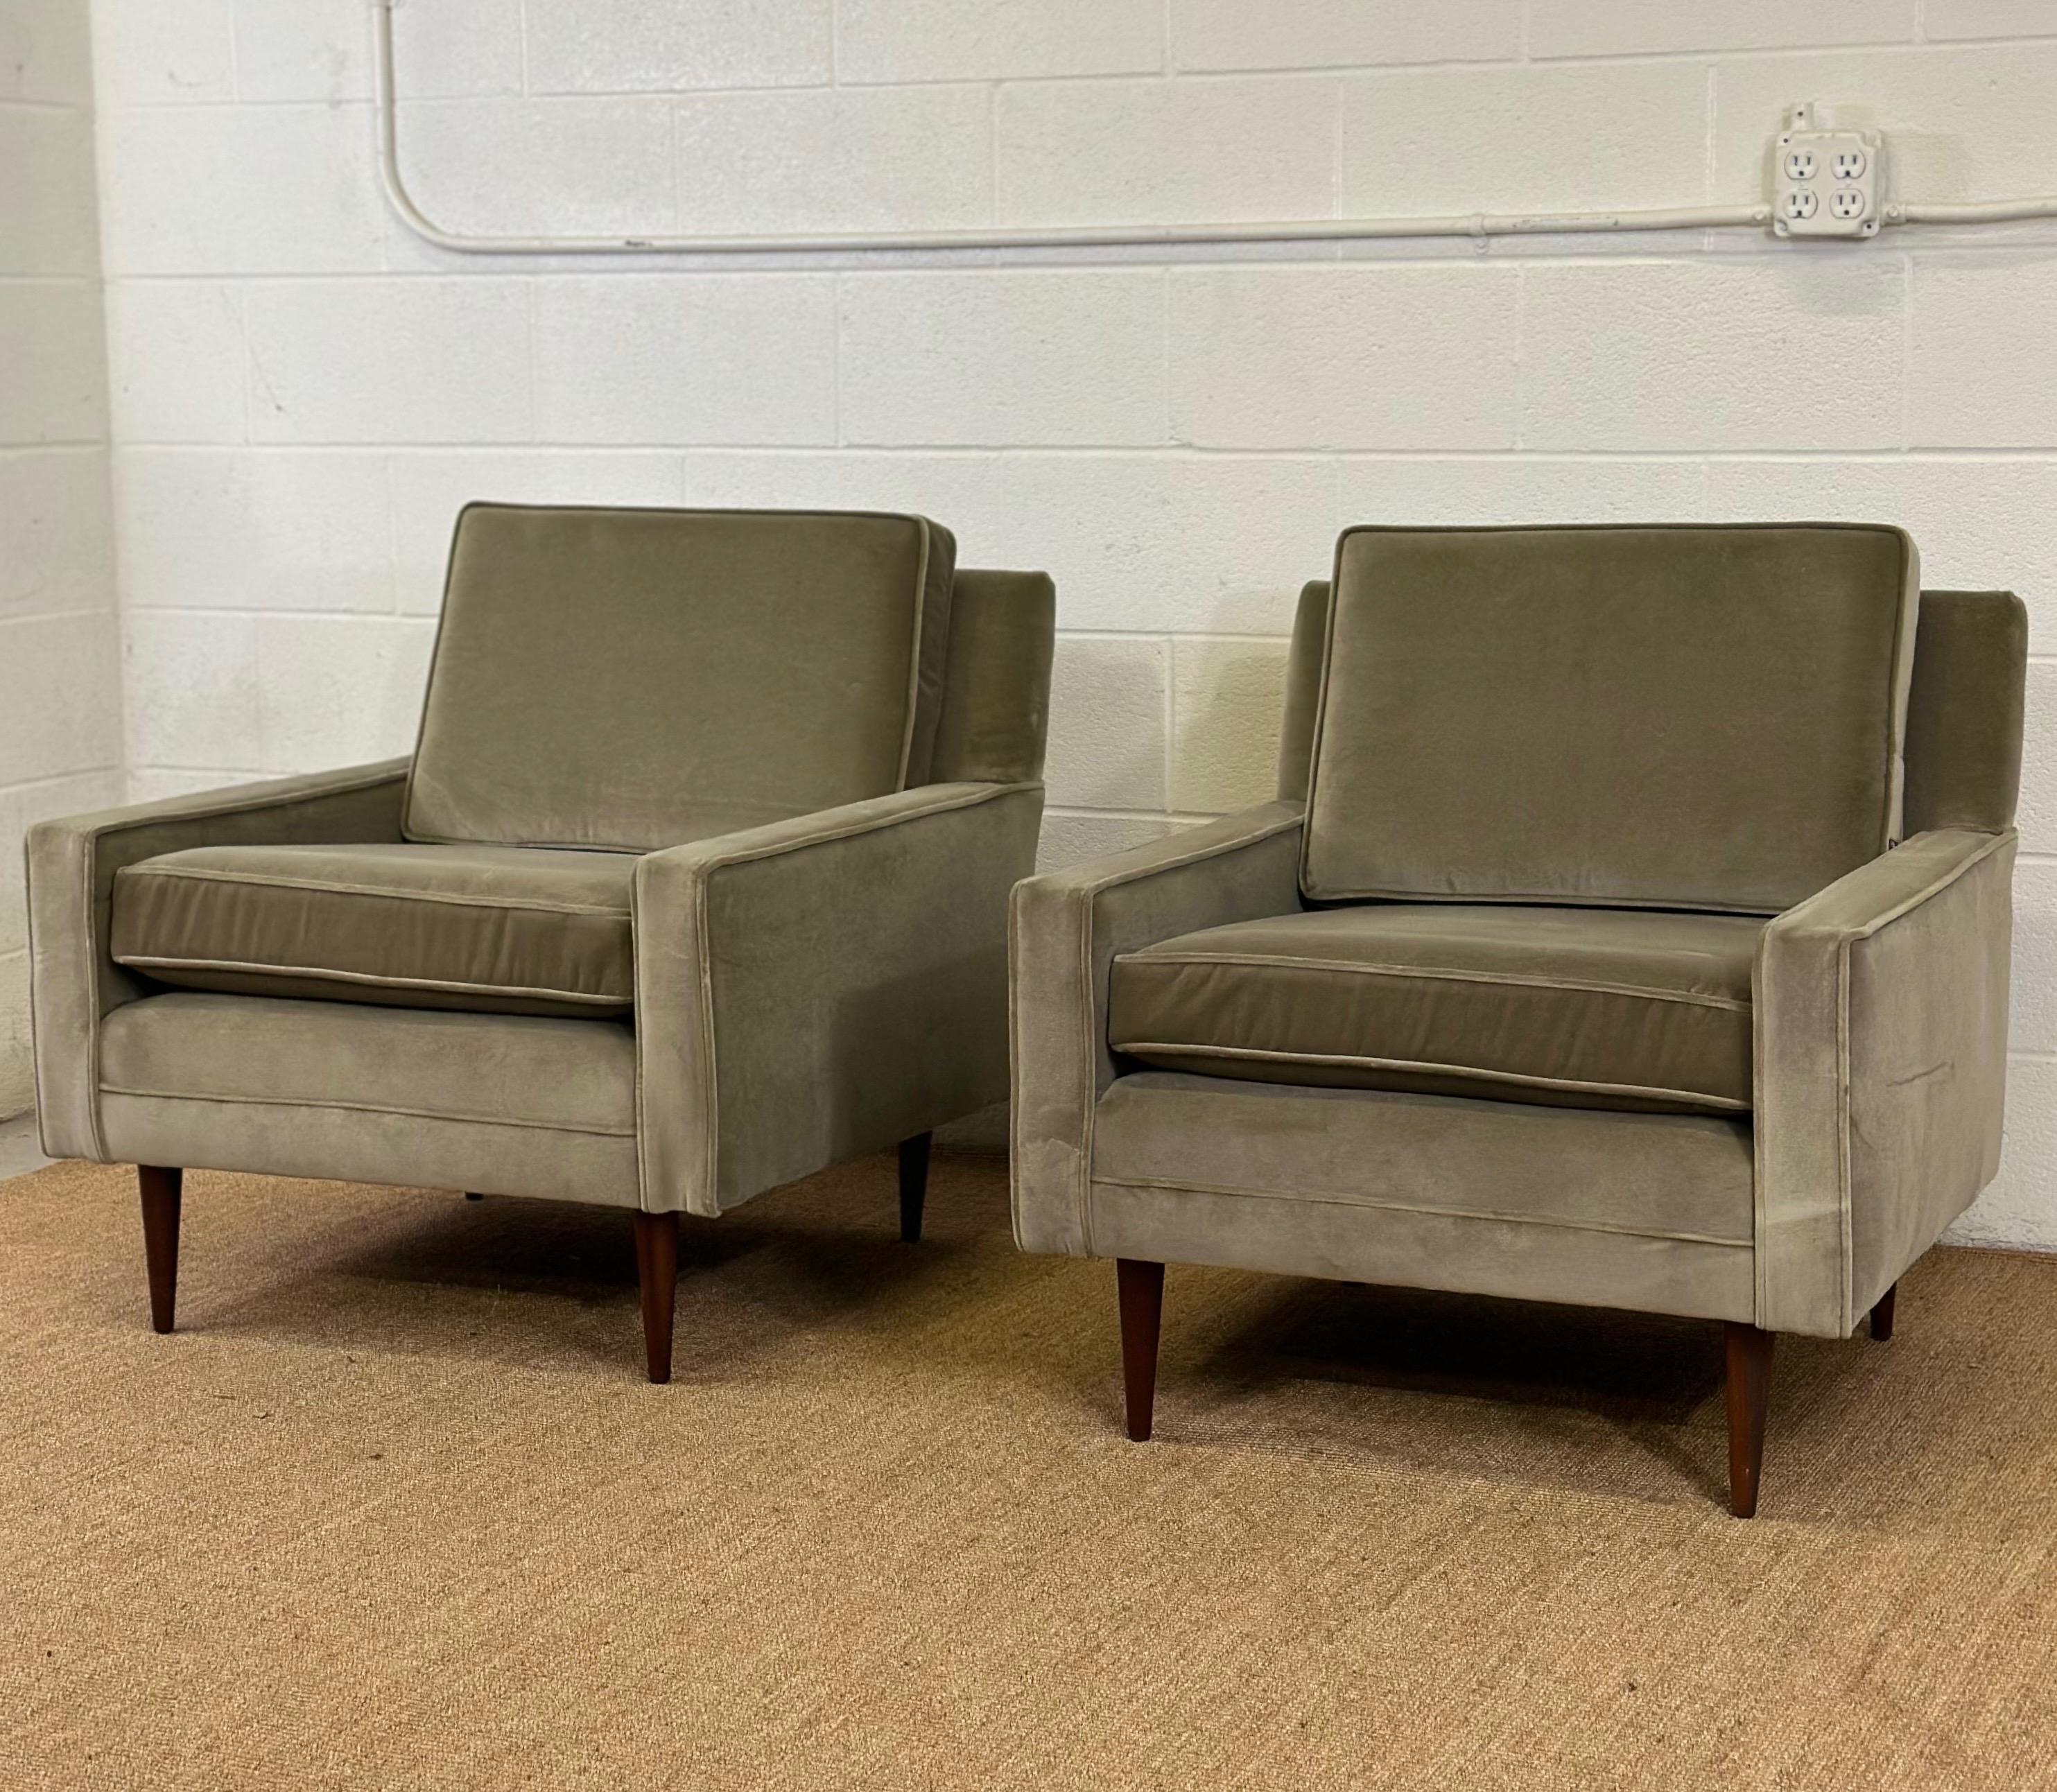 We are very pleased to offer a stunning vintage pair of Mid-Century Modern armchairs, circa the 1950s.  This set is distinguished by its remarkable linear silhouette and has been beautifully reupholstered to offer both style and comfort.  Each chair